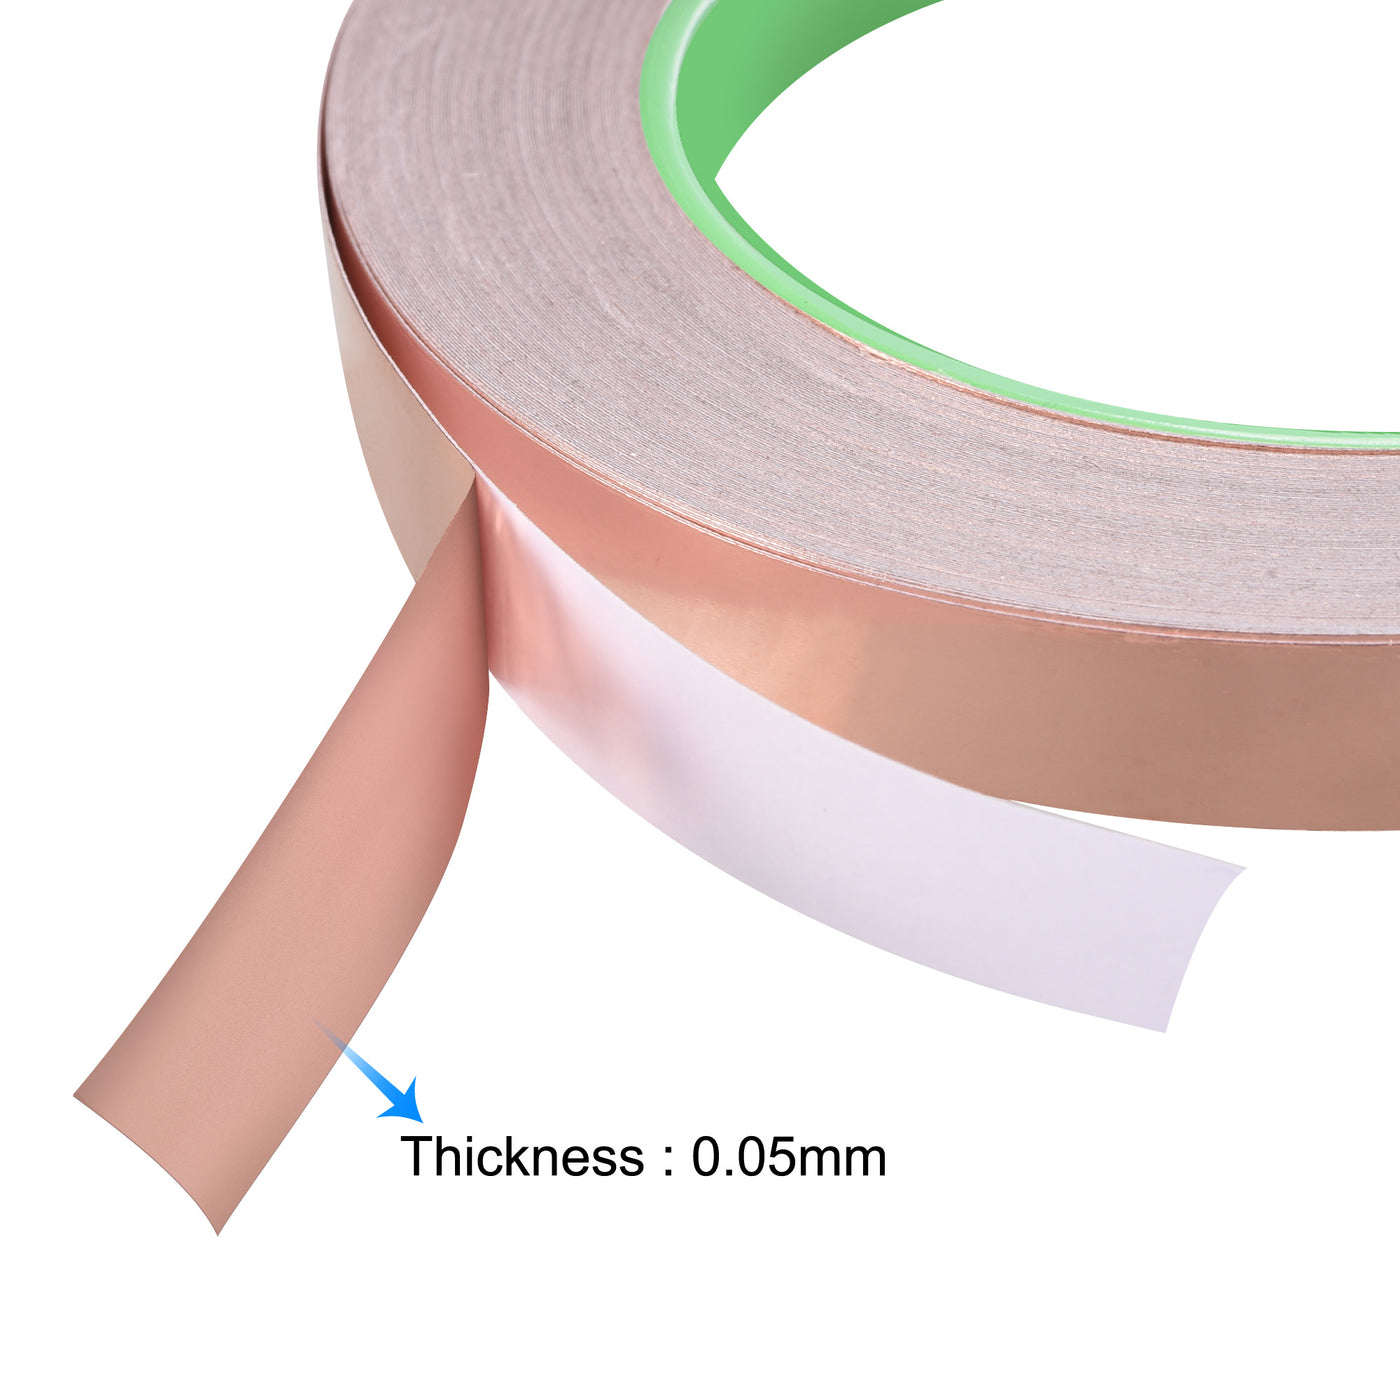 uxcell Uxcell Double-Sided Conductive Tape Copper Foil Tape 5mm x 30m/98.4ft 4pcs